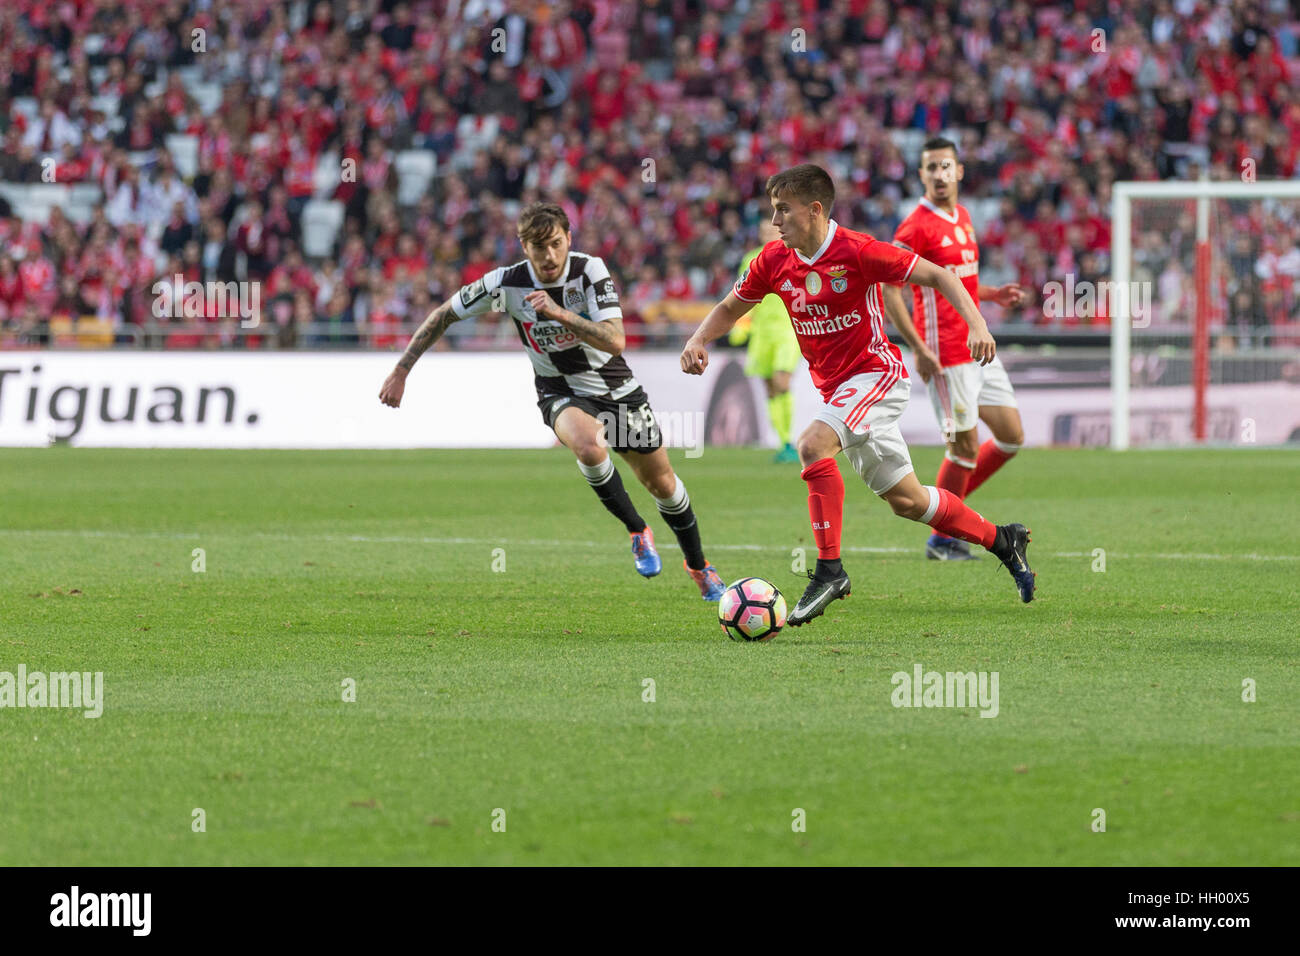 Lisbon, Portugal. 14th January, 2017.Benfica's forward from Argentina Franco Cervi (22) in action during the game SL Benfica v Boavista FC in Lisbon, Portugal. © Alexandre de Sousa/Alamy Live News Stock Photo